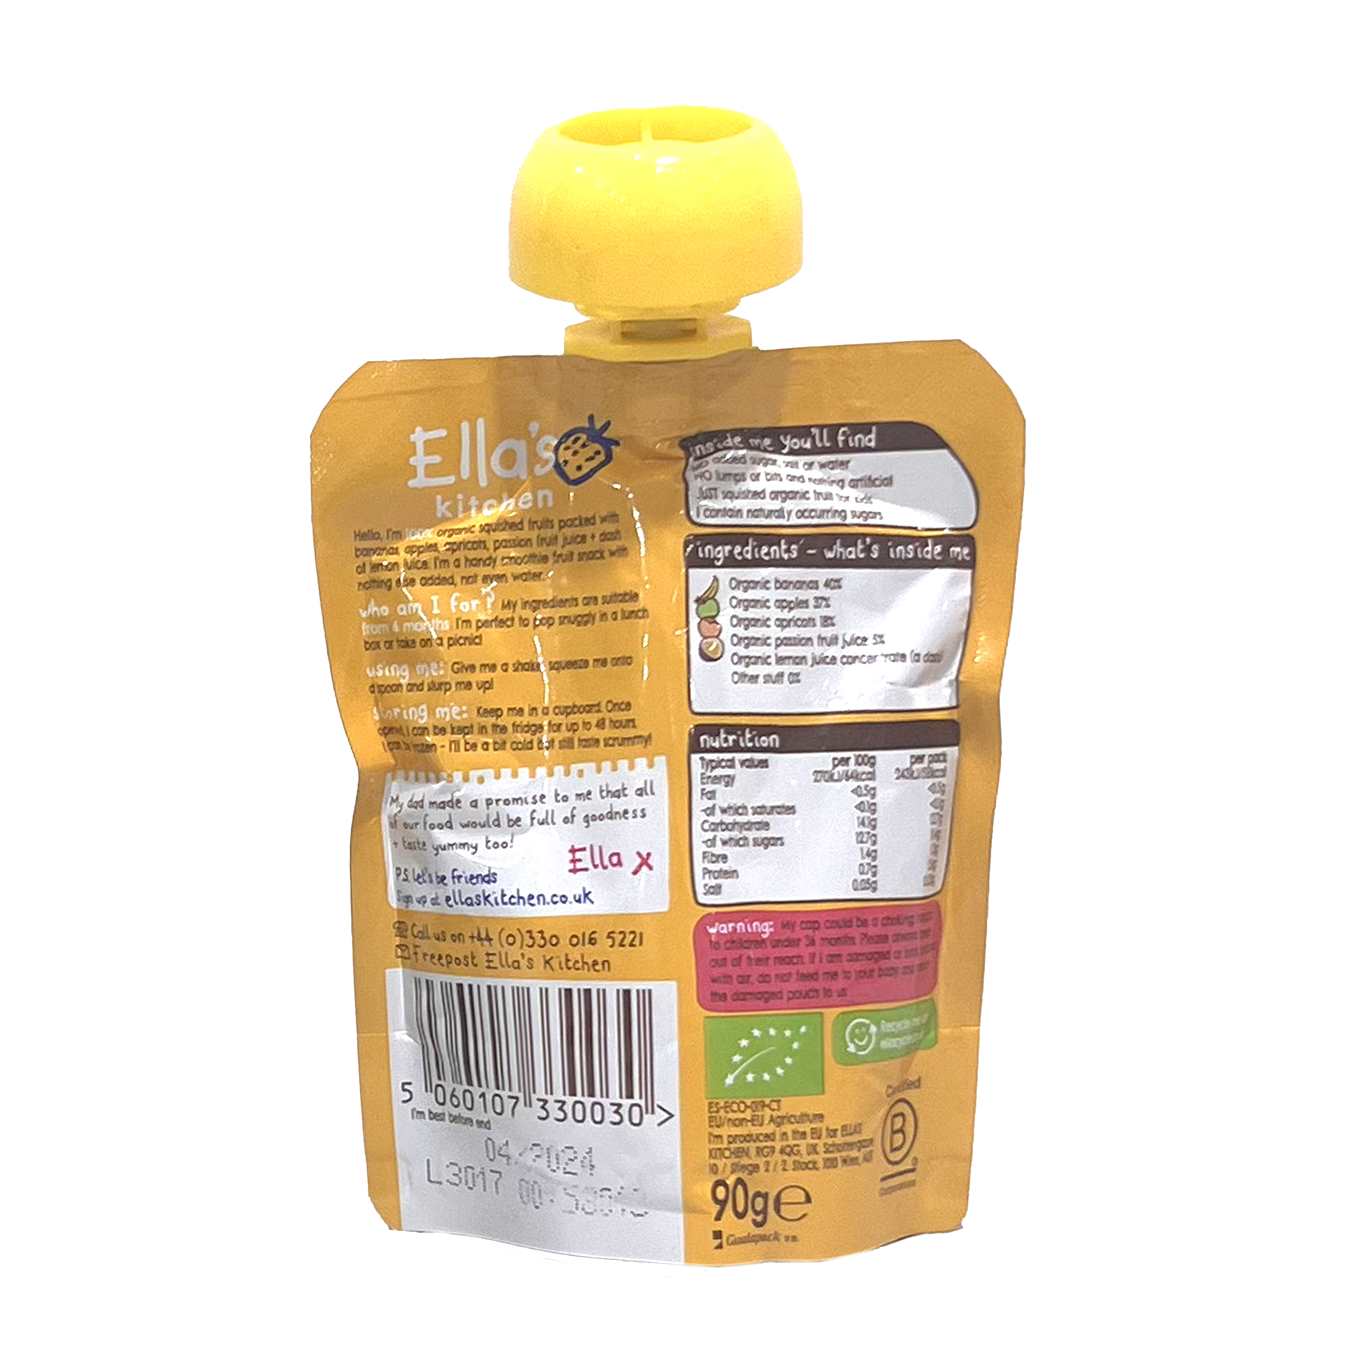 Buy Ella's Kitchen, The Yellow one puree for babies in India at uyyyaala.com